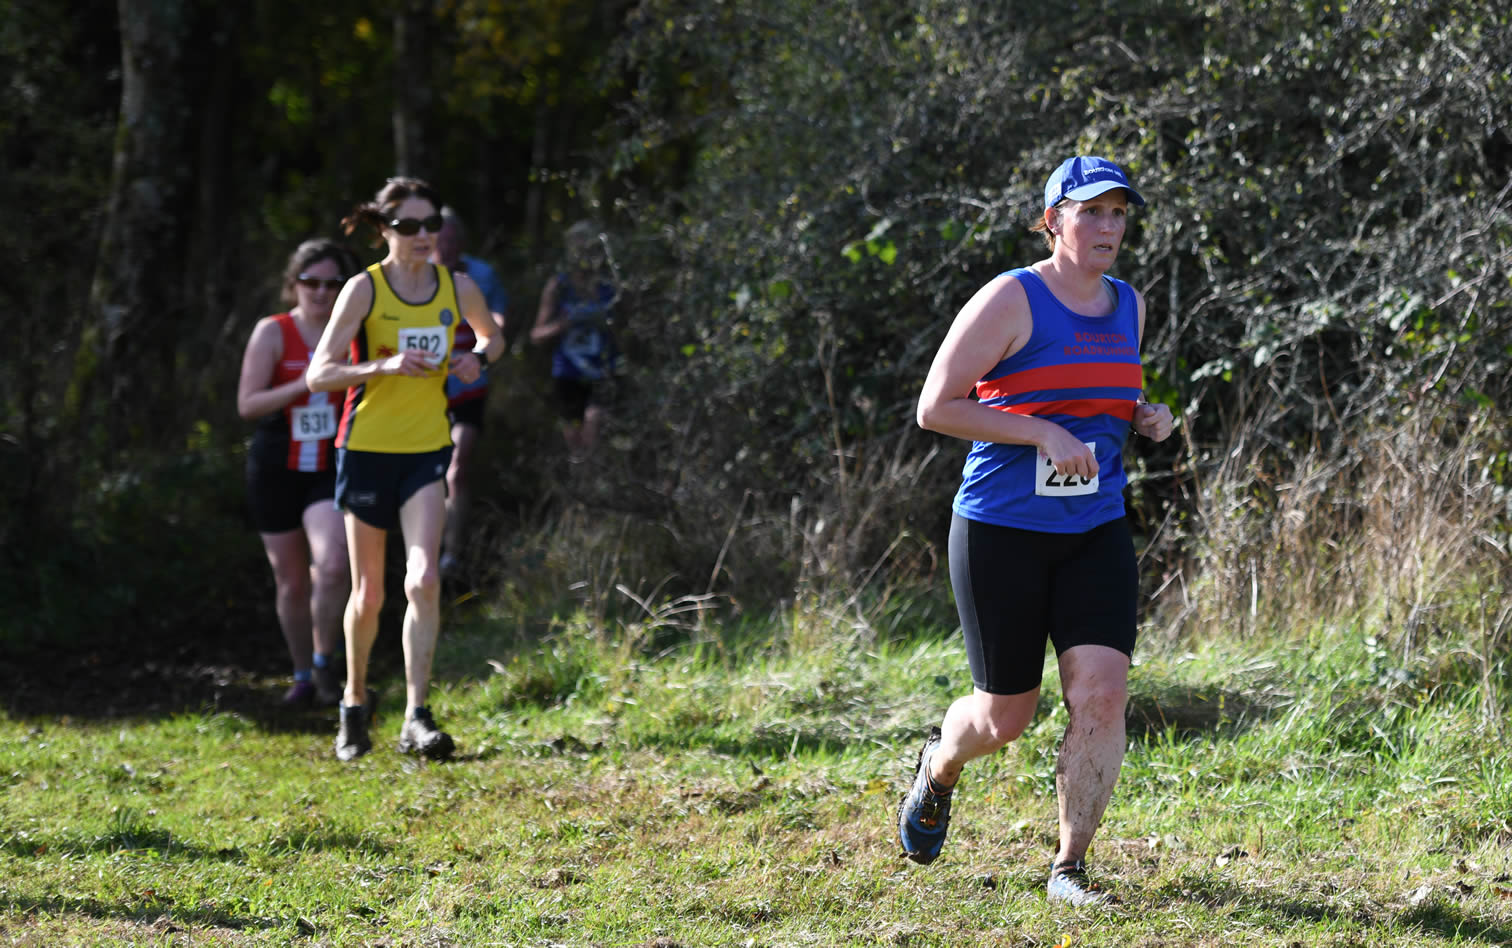 Maxine Emes at Gloucestershire AAA Cross Country League, Cirencester Park - 30th October 2021